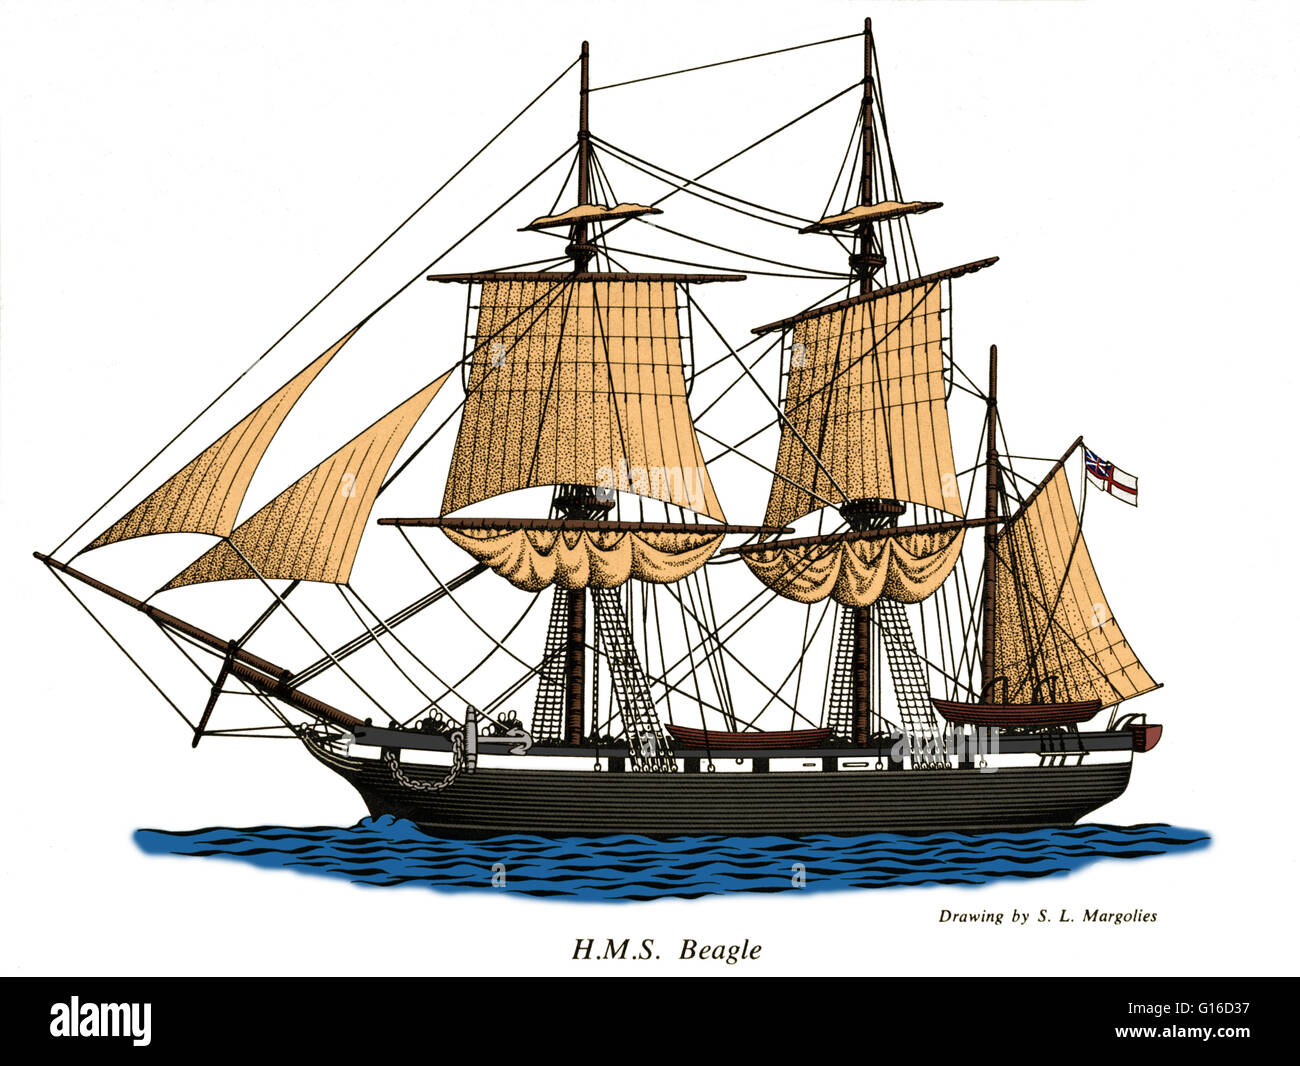 H.M.S. Beagle, a ship assigned by the Admiralty to surveying the southern  coast of South America in two expeditions, the second of which involved  Charles Darwin, who gathered information that would later